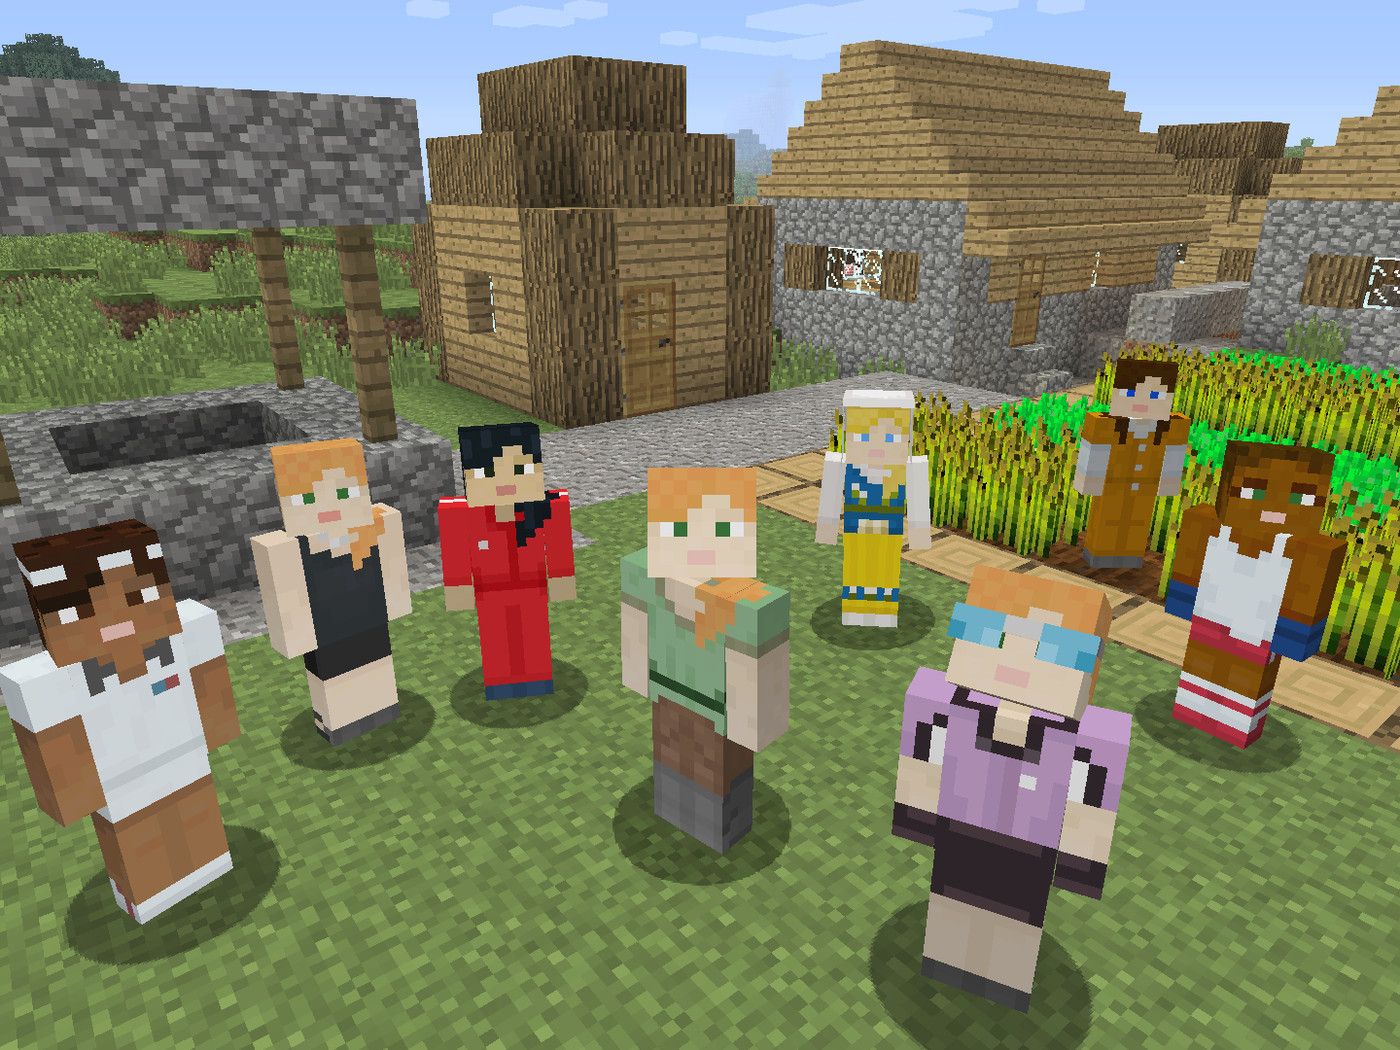 You can finally choose to play as a girl in Minecraft